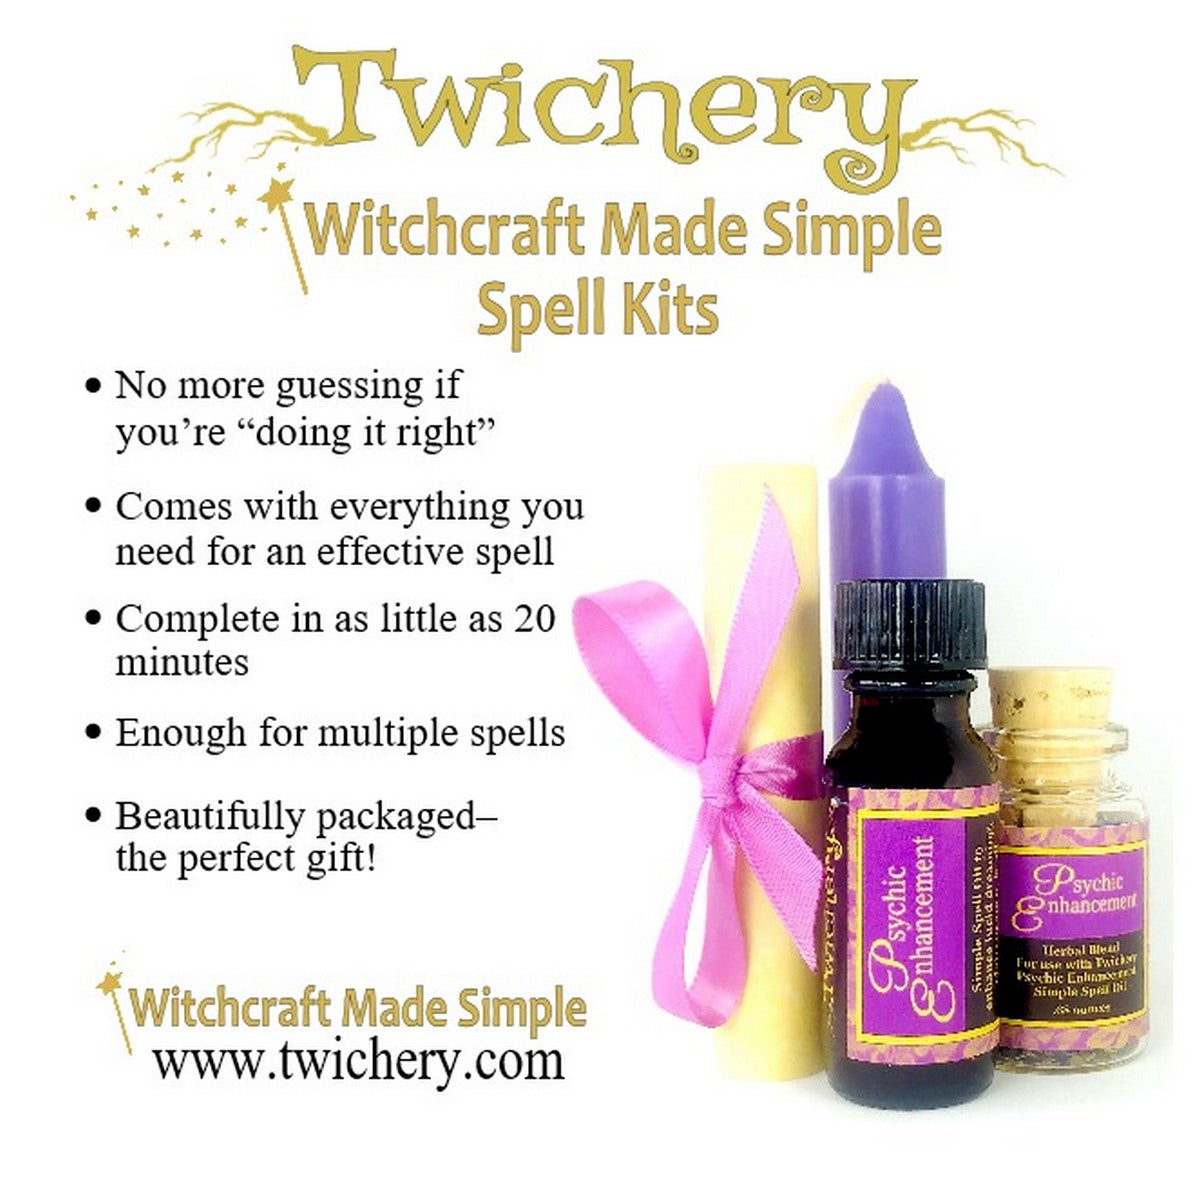 Twichery Psychic Enhancement Spell Kit - Witchcraft Made Simple - Wicca Pagan - Lucid Dreaming - Psychic Abilities Hoodoo Voodoo